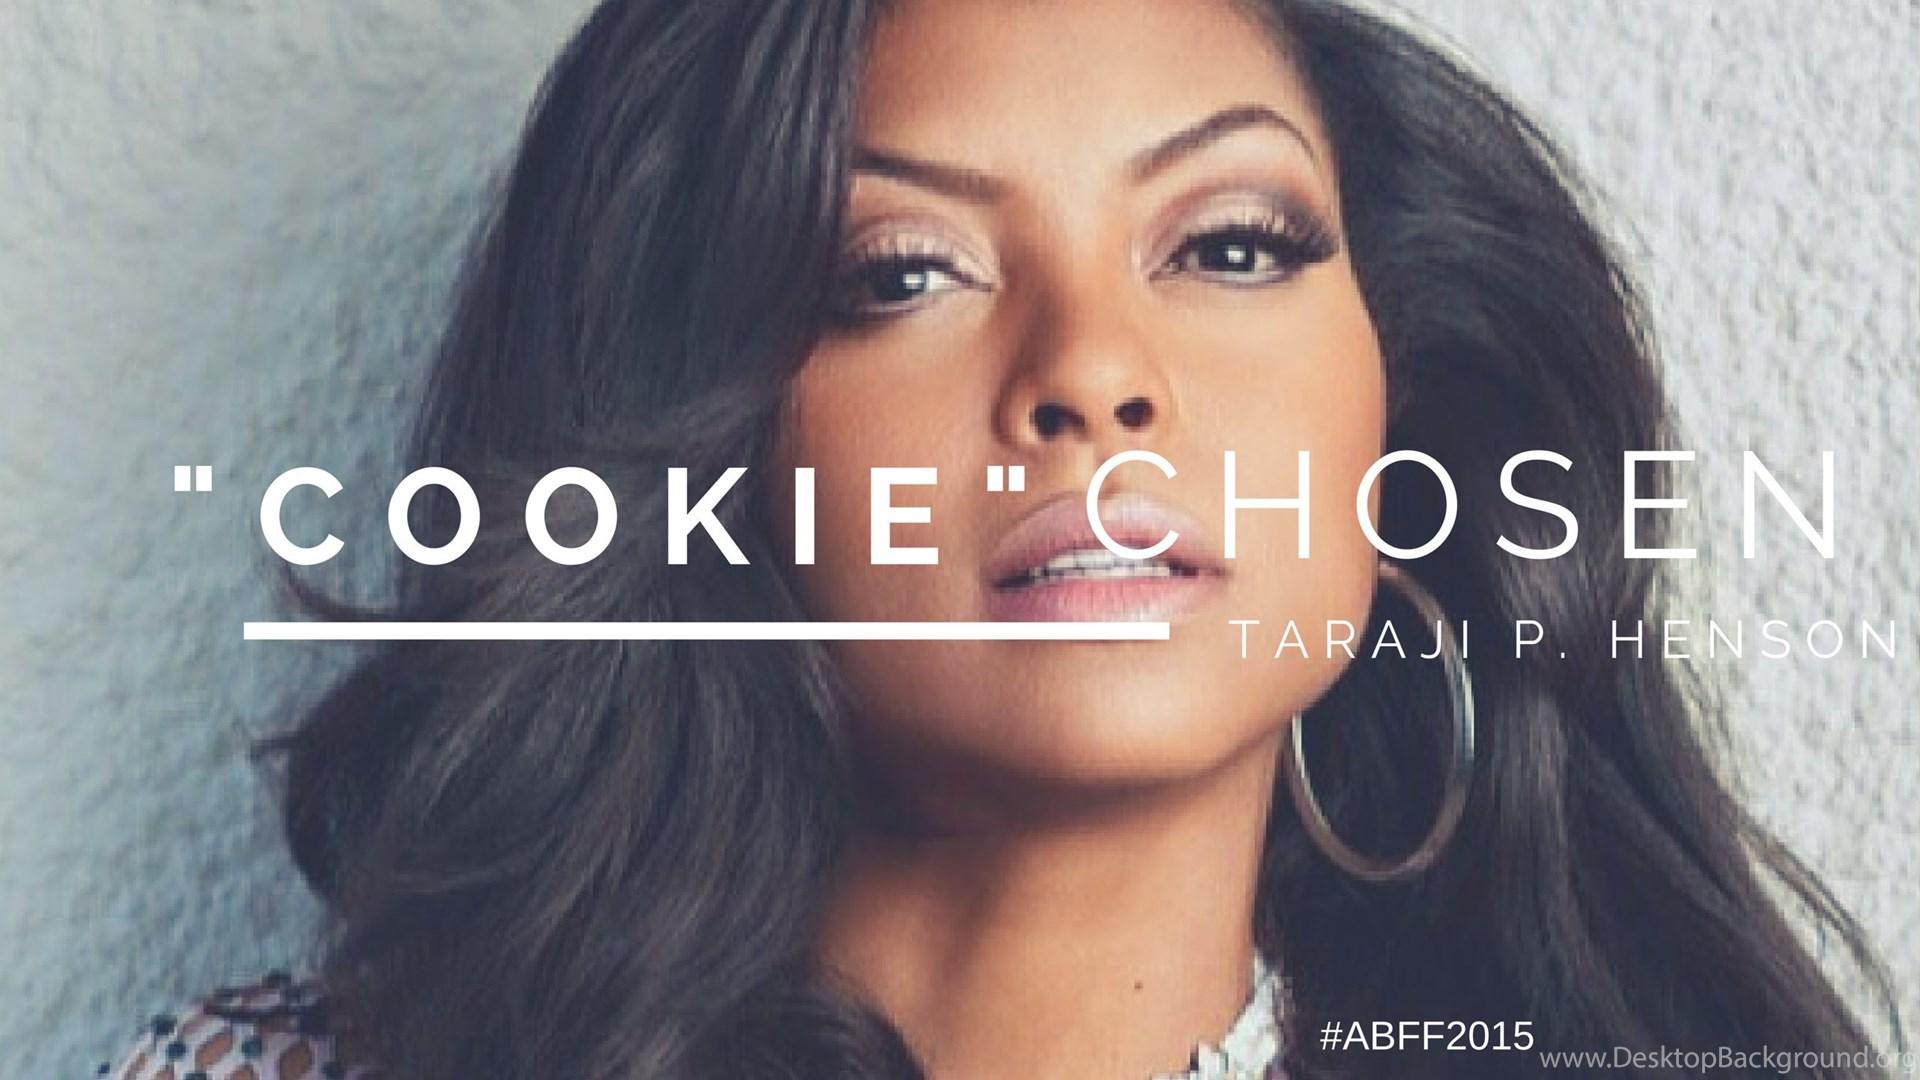 Empires: Taraji P. Henson Why Lee Daniel's Picked Her For Cookie